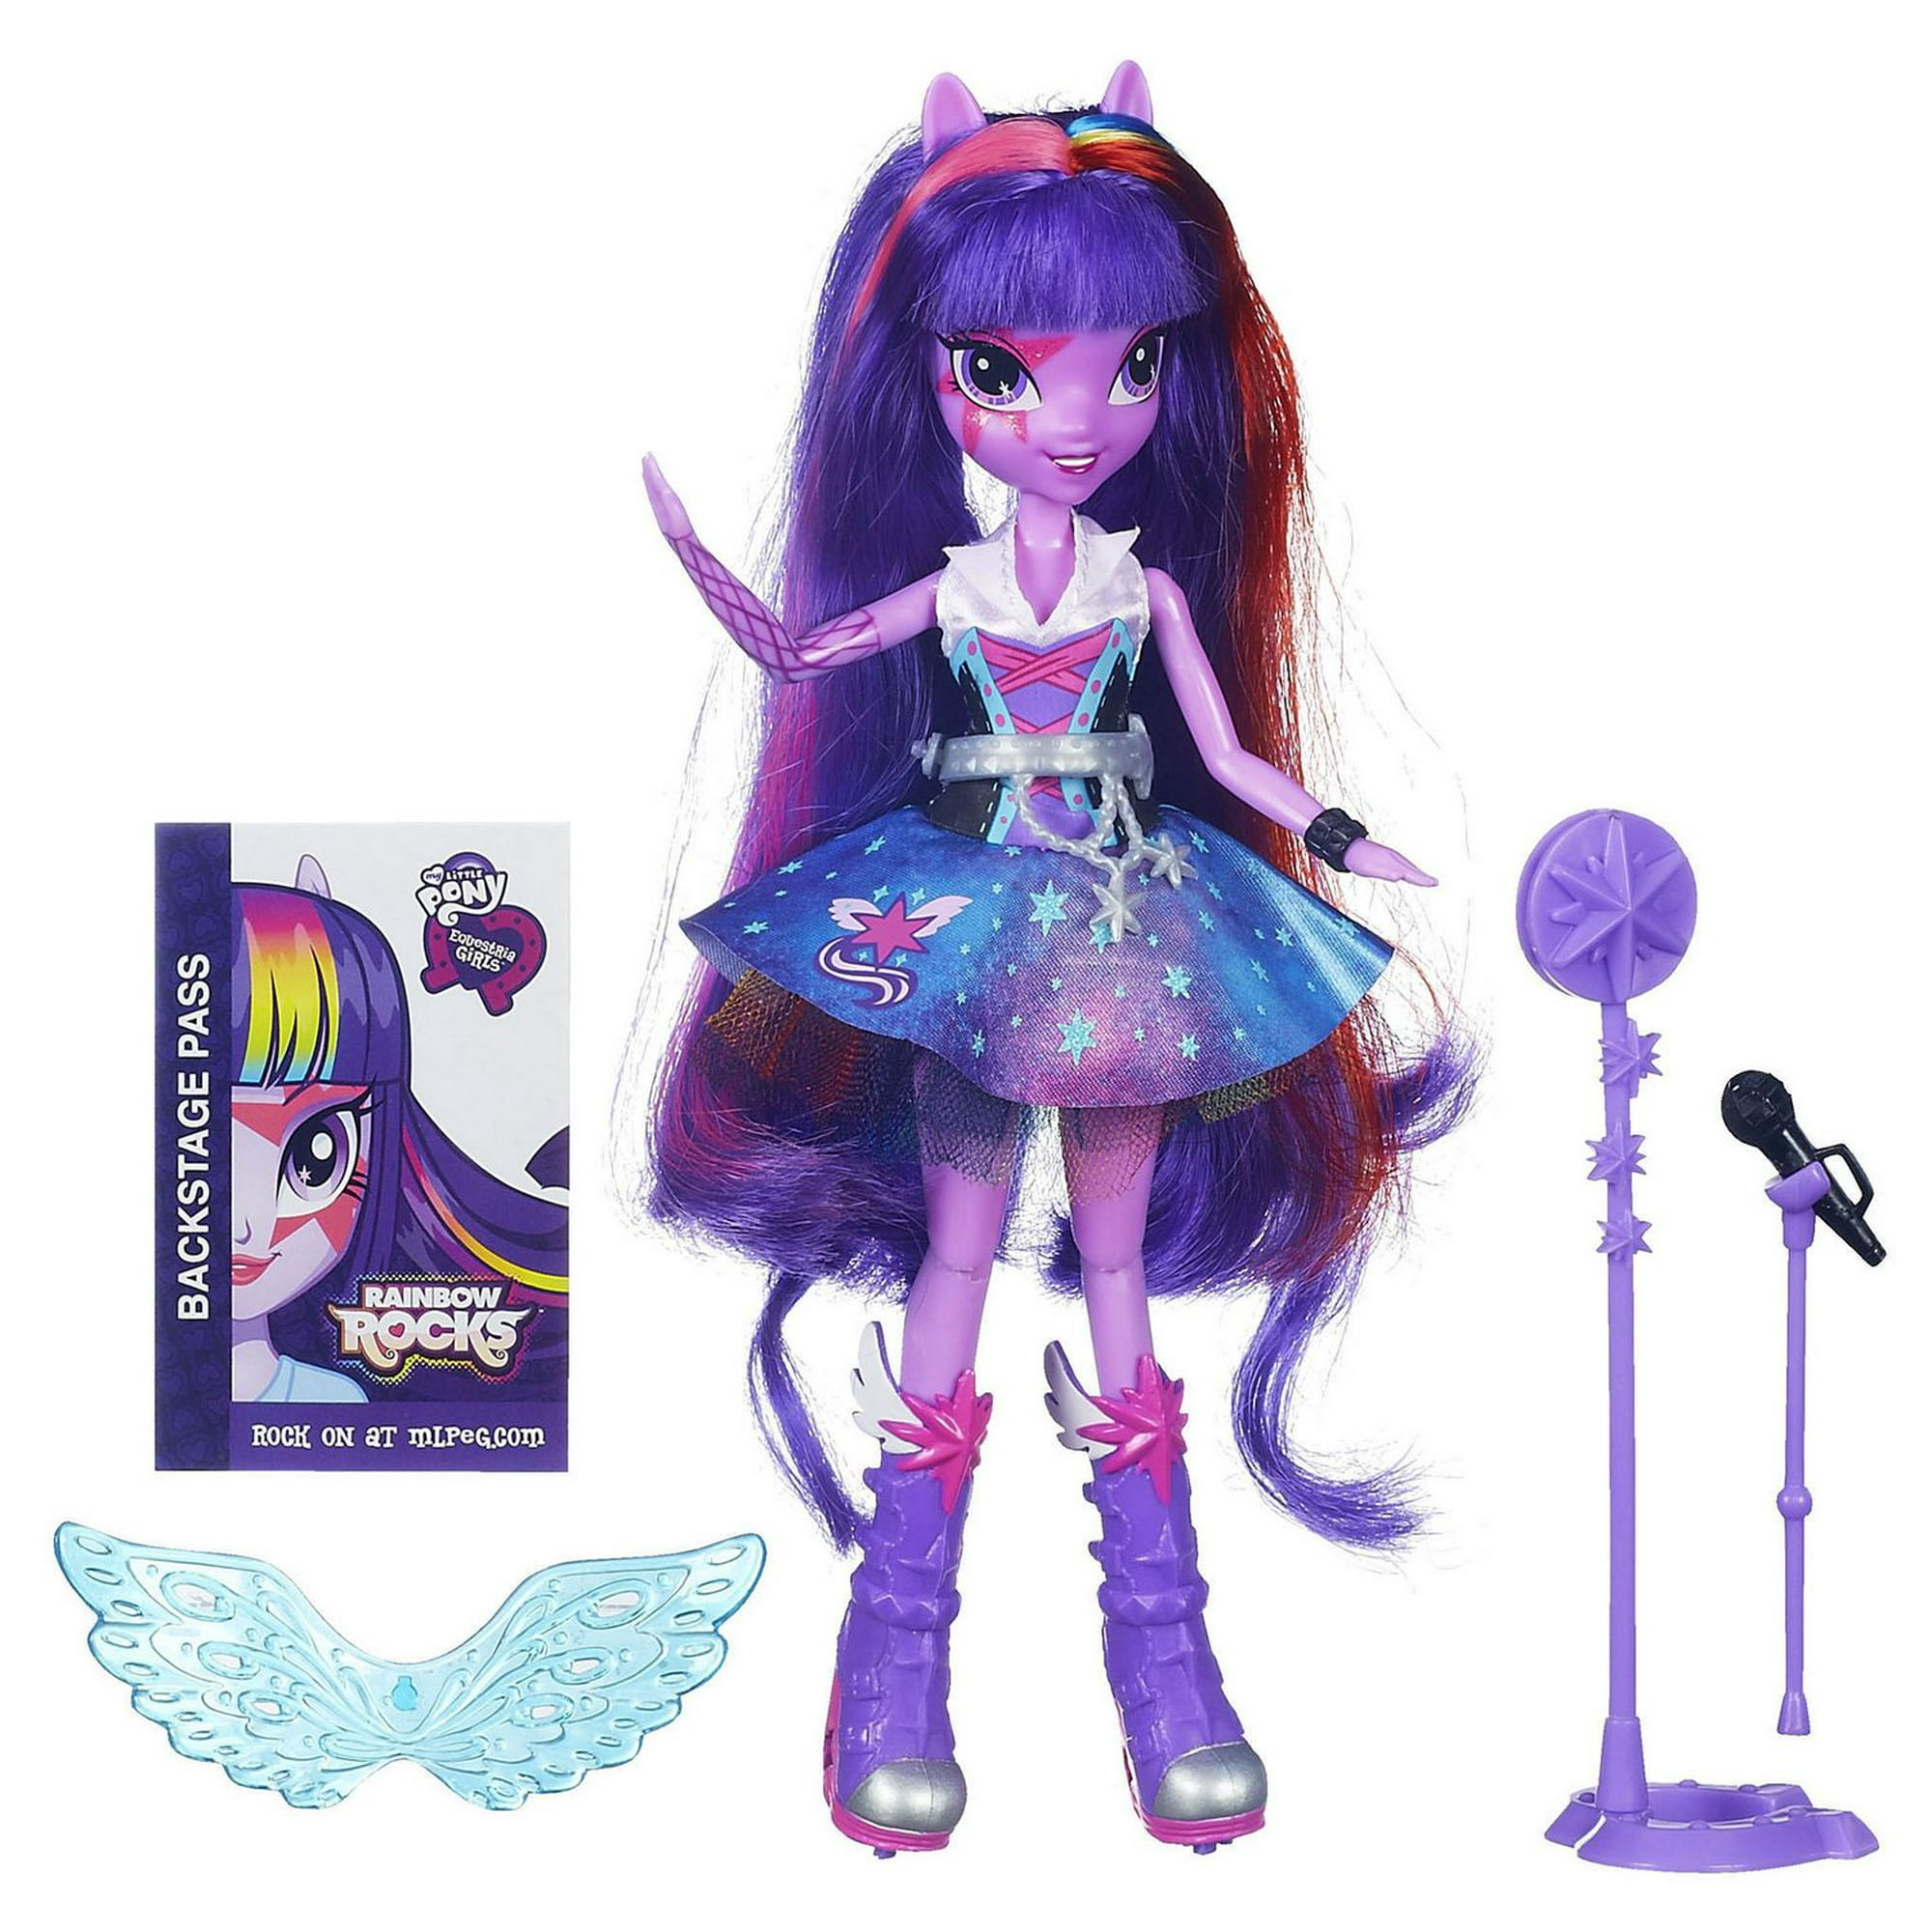 Exclusive clip: Twilight Sparkle sings in 'Equestria Girls